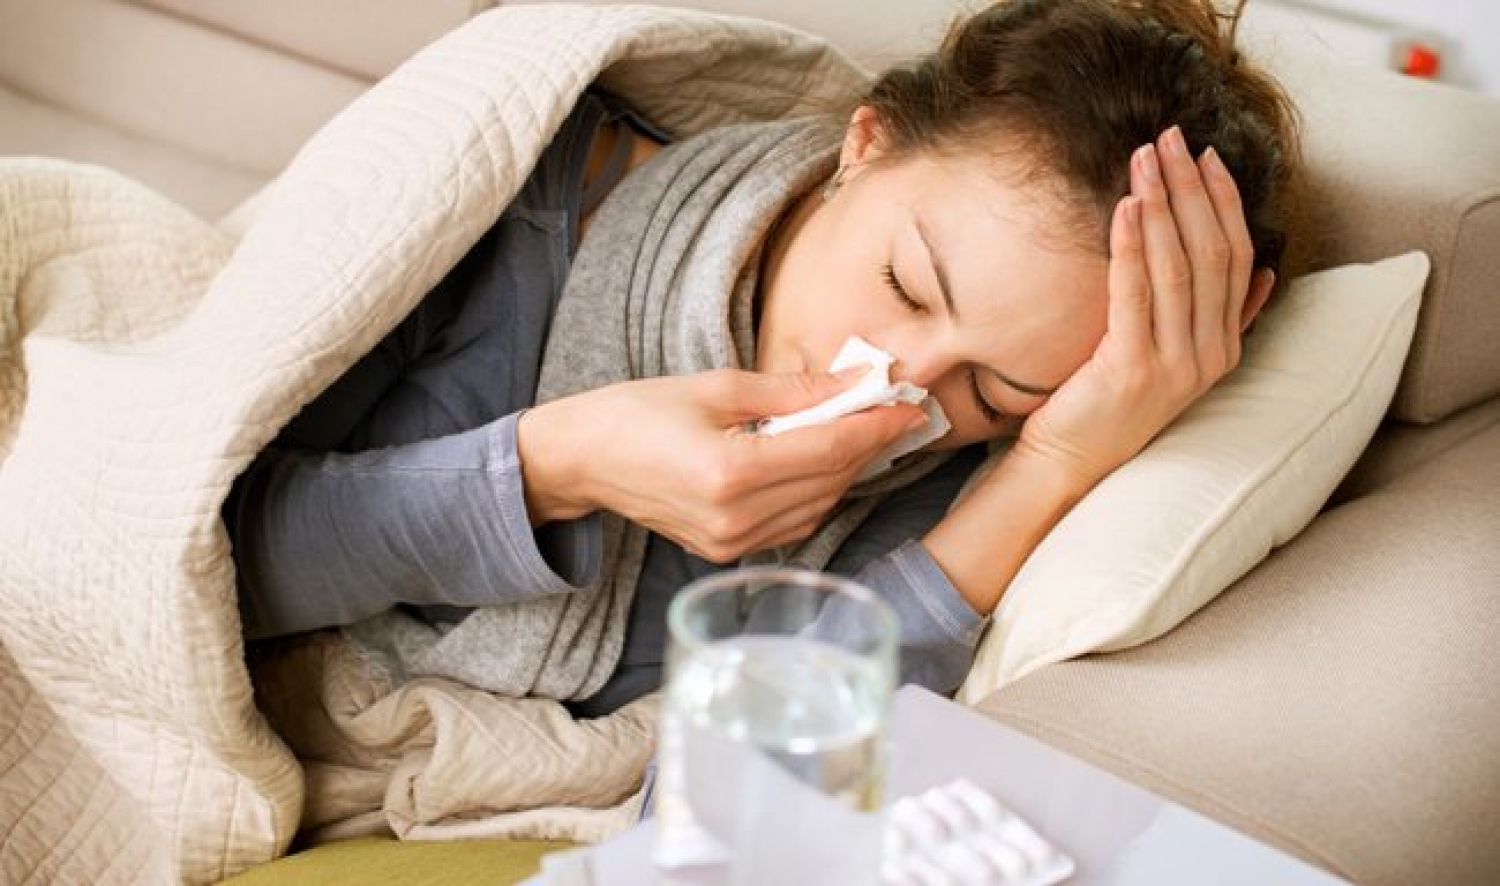 6 Ways To Keep Your Home Flu Free